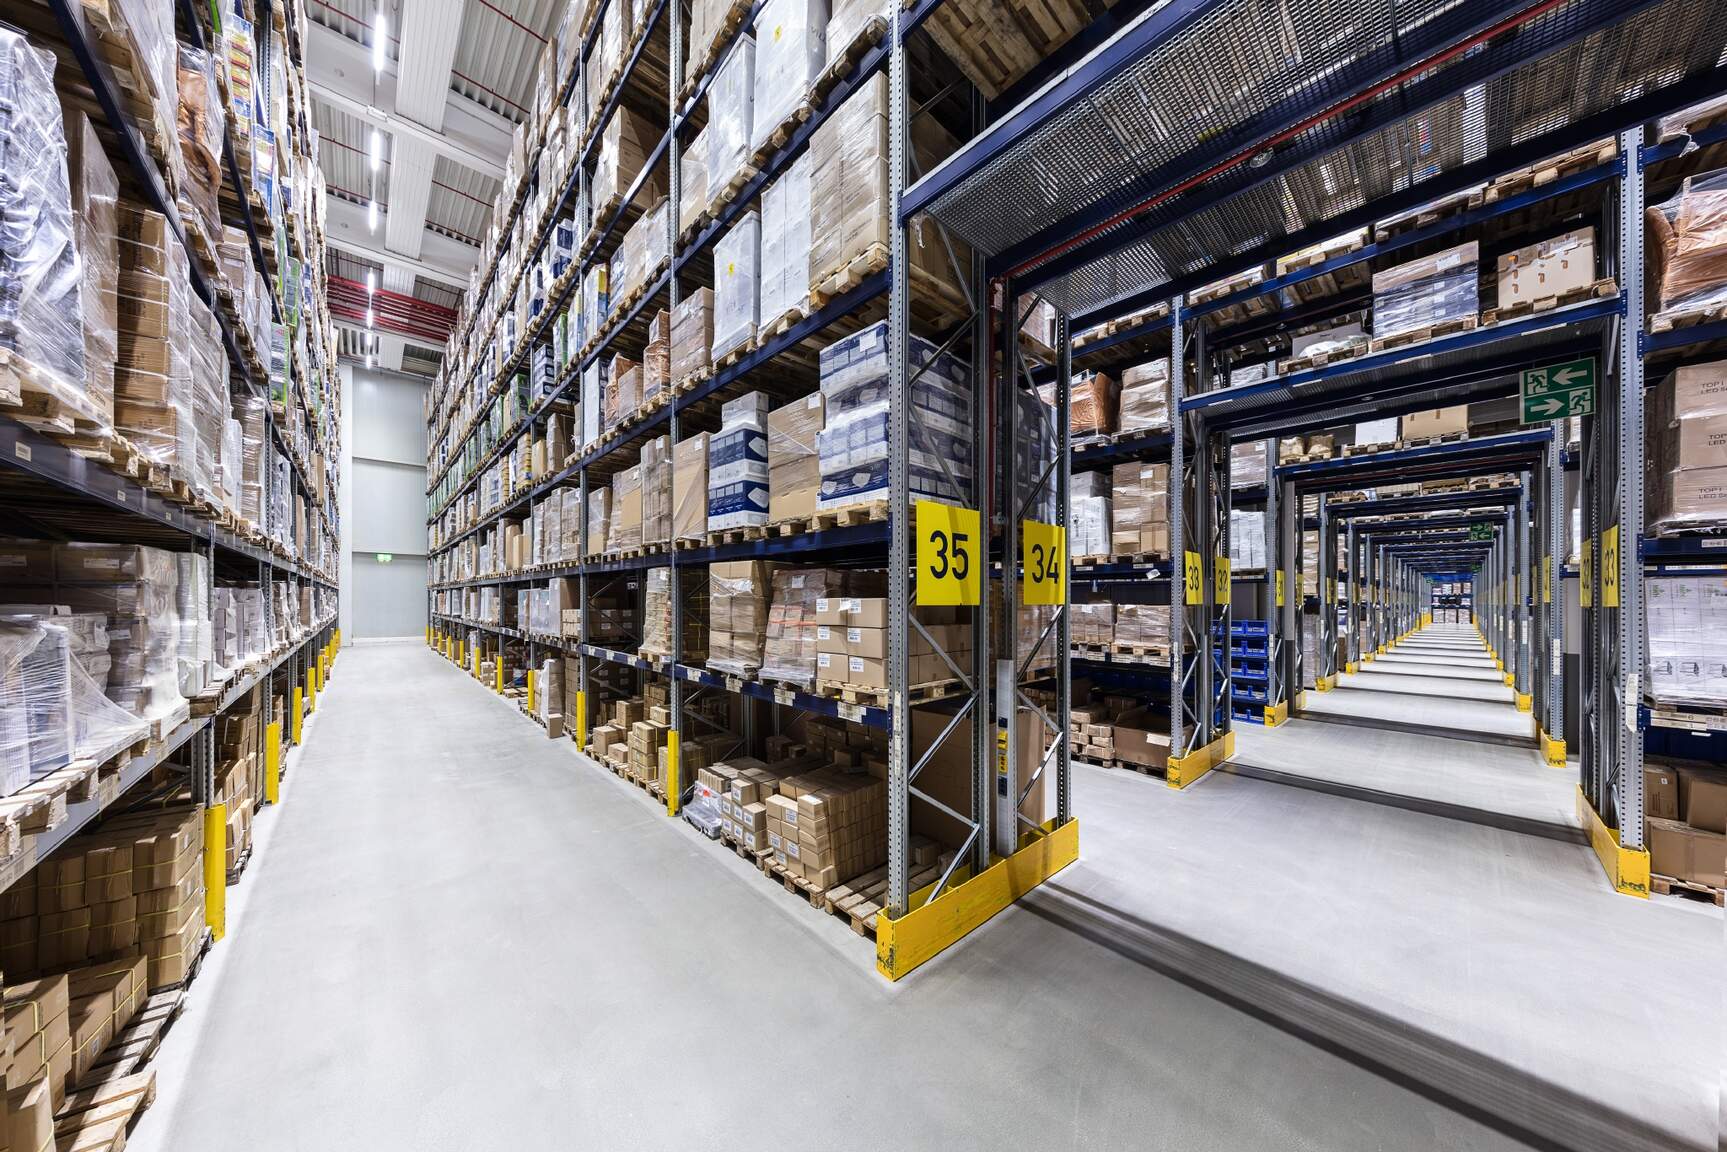 As an integrated logistics provider, Dachser manages 169 warehouse locations around the world